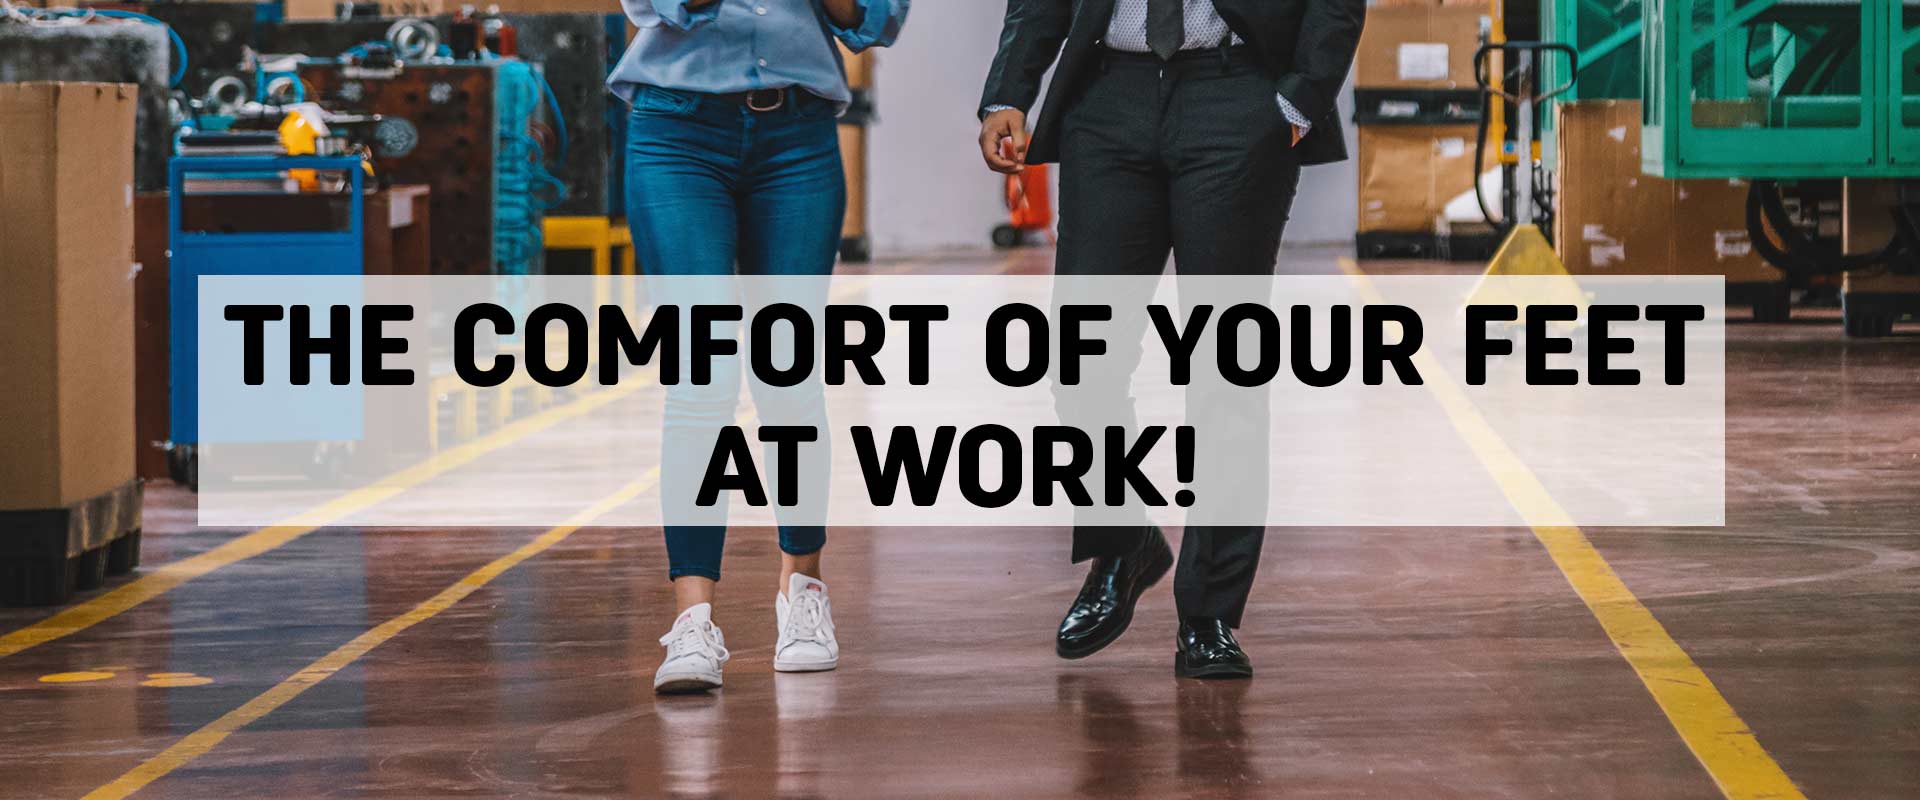 Confort of your feet at work thanks to gel insoles